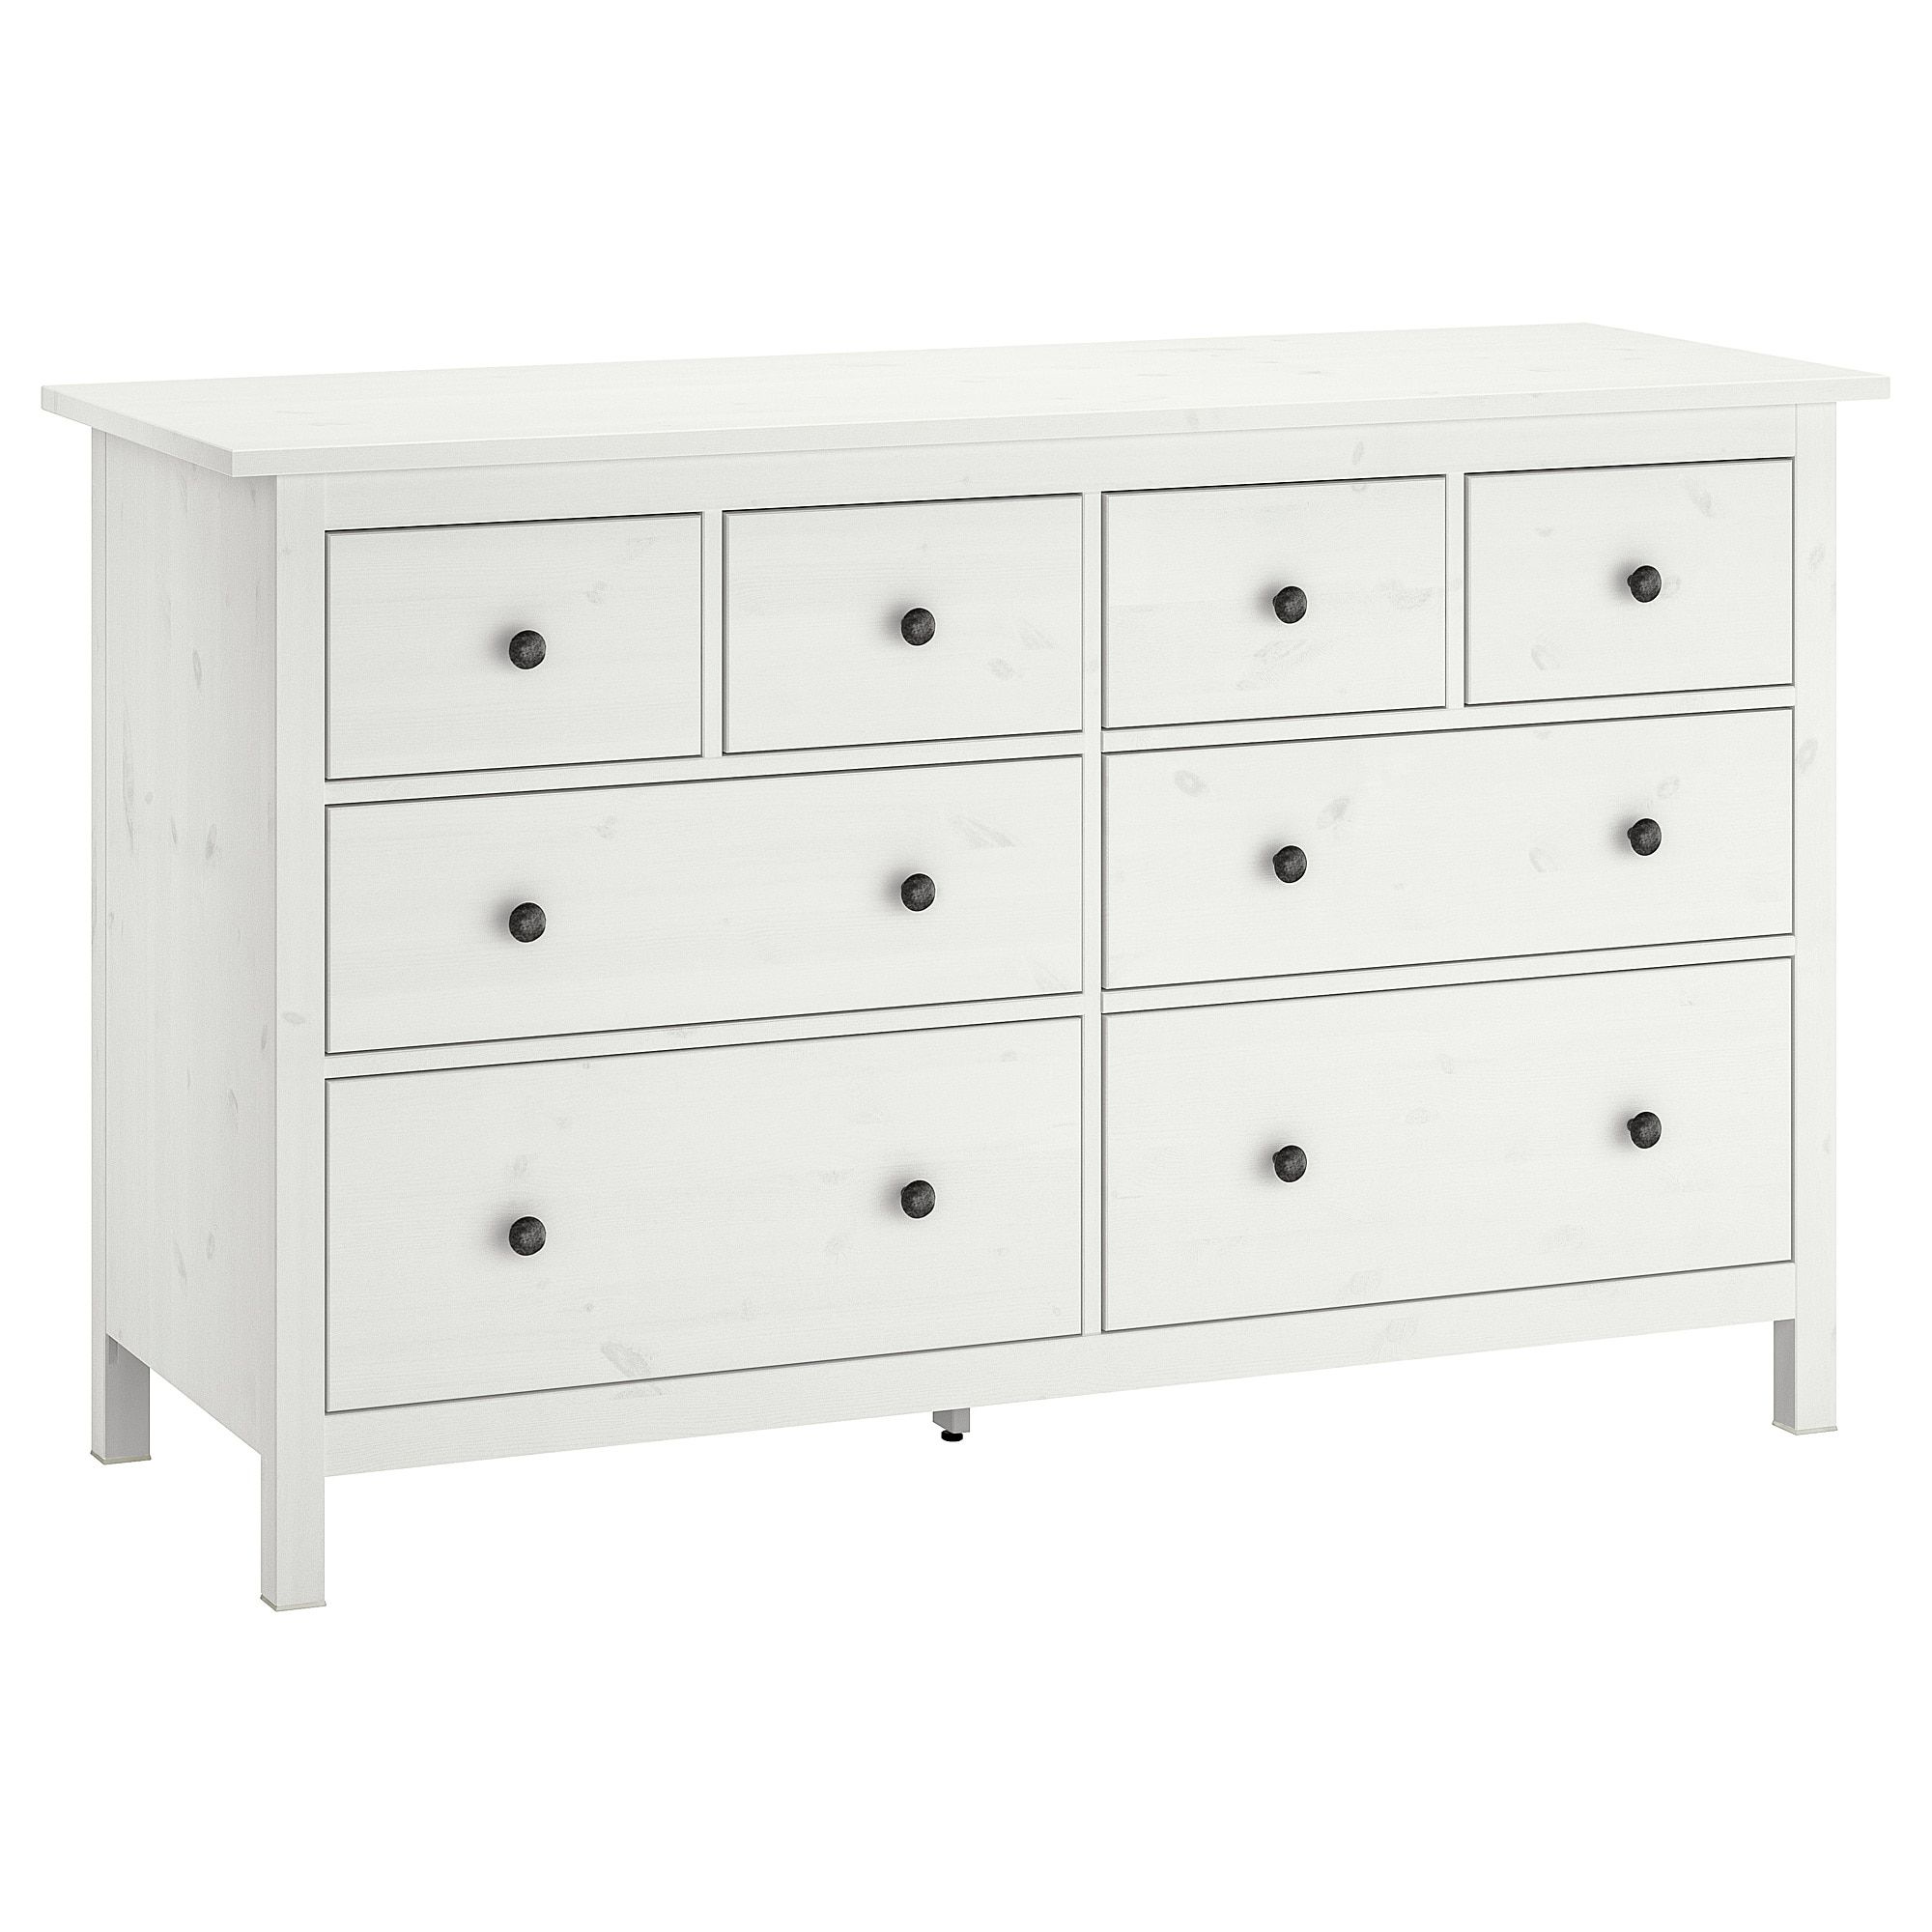 2019 Hemnes Chest Of 8 Drawers White Stain 160 X 96 Cm – Ikea Within Satin Black & Painted White Sideboards (View 8 of 20)